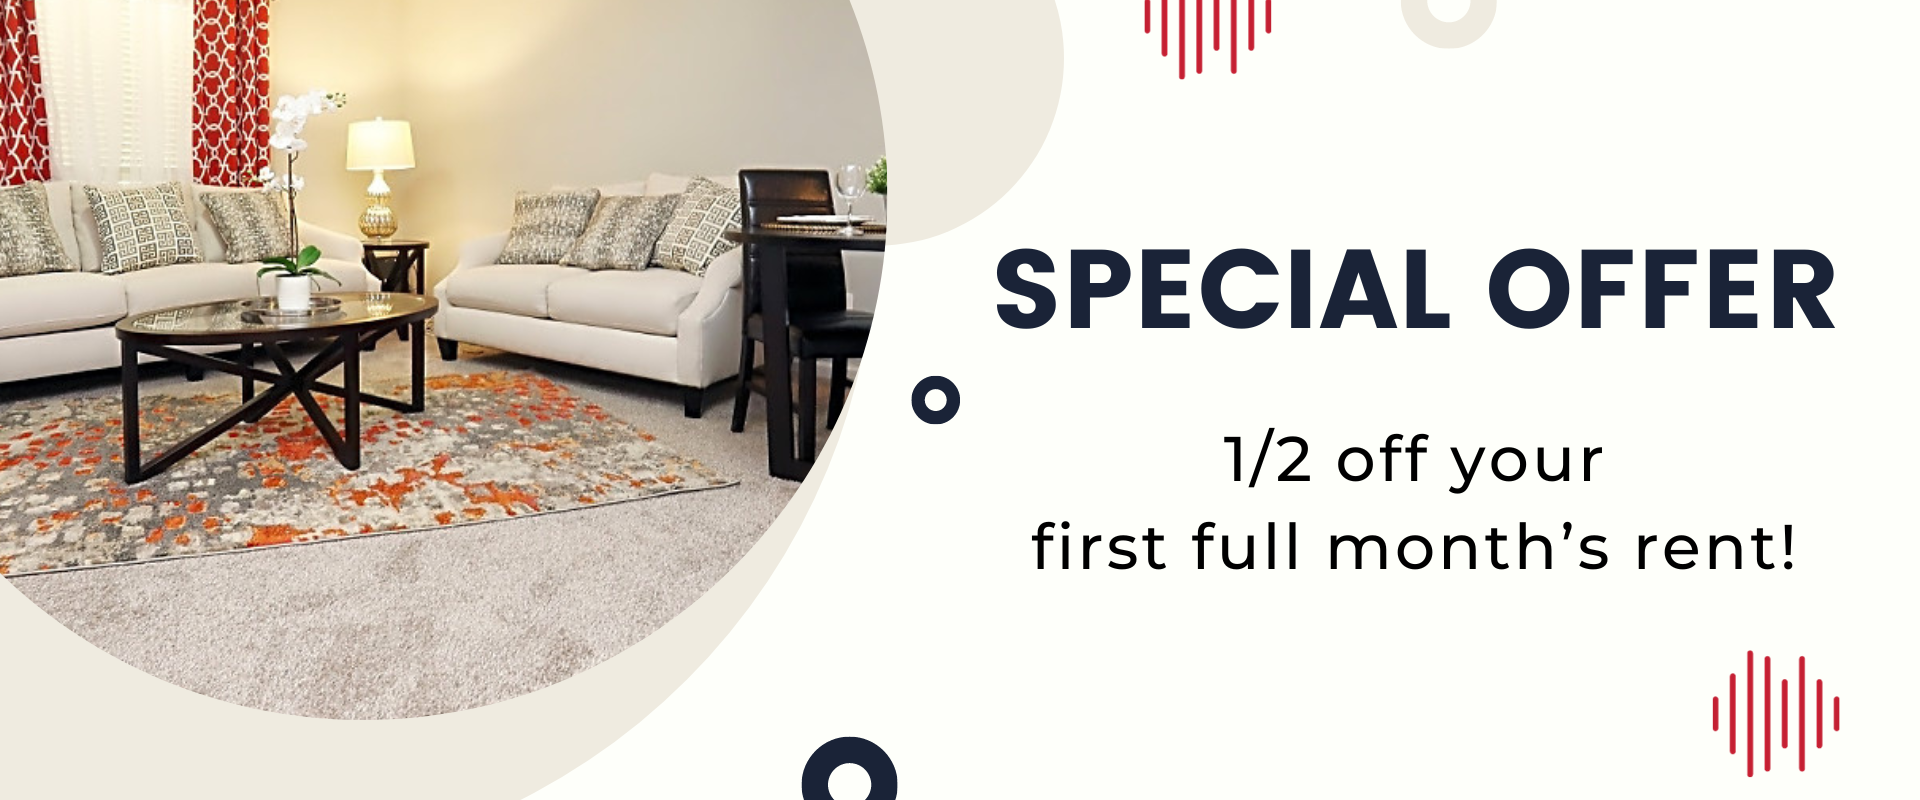 Special offer - 1/2 off your first full months rent!